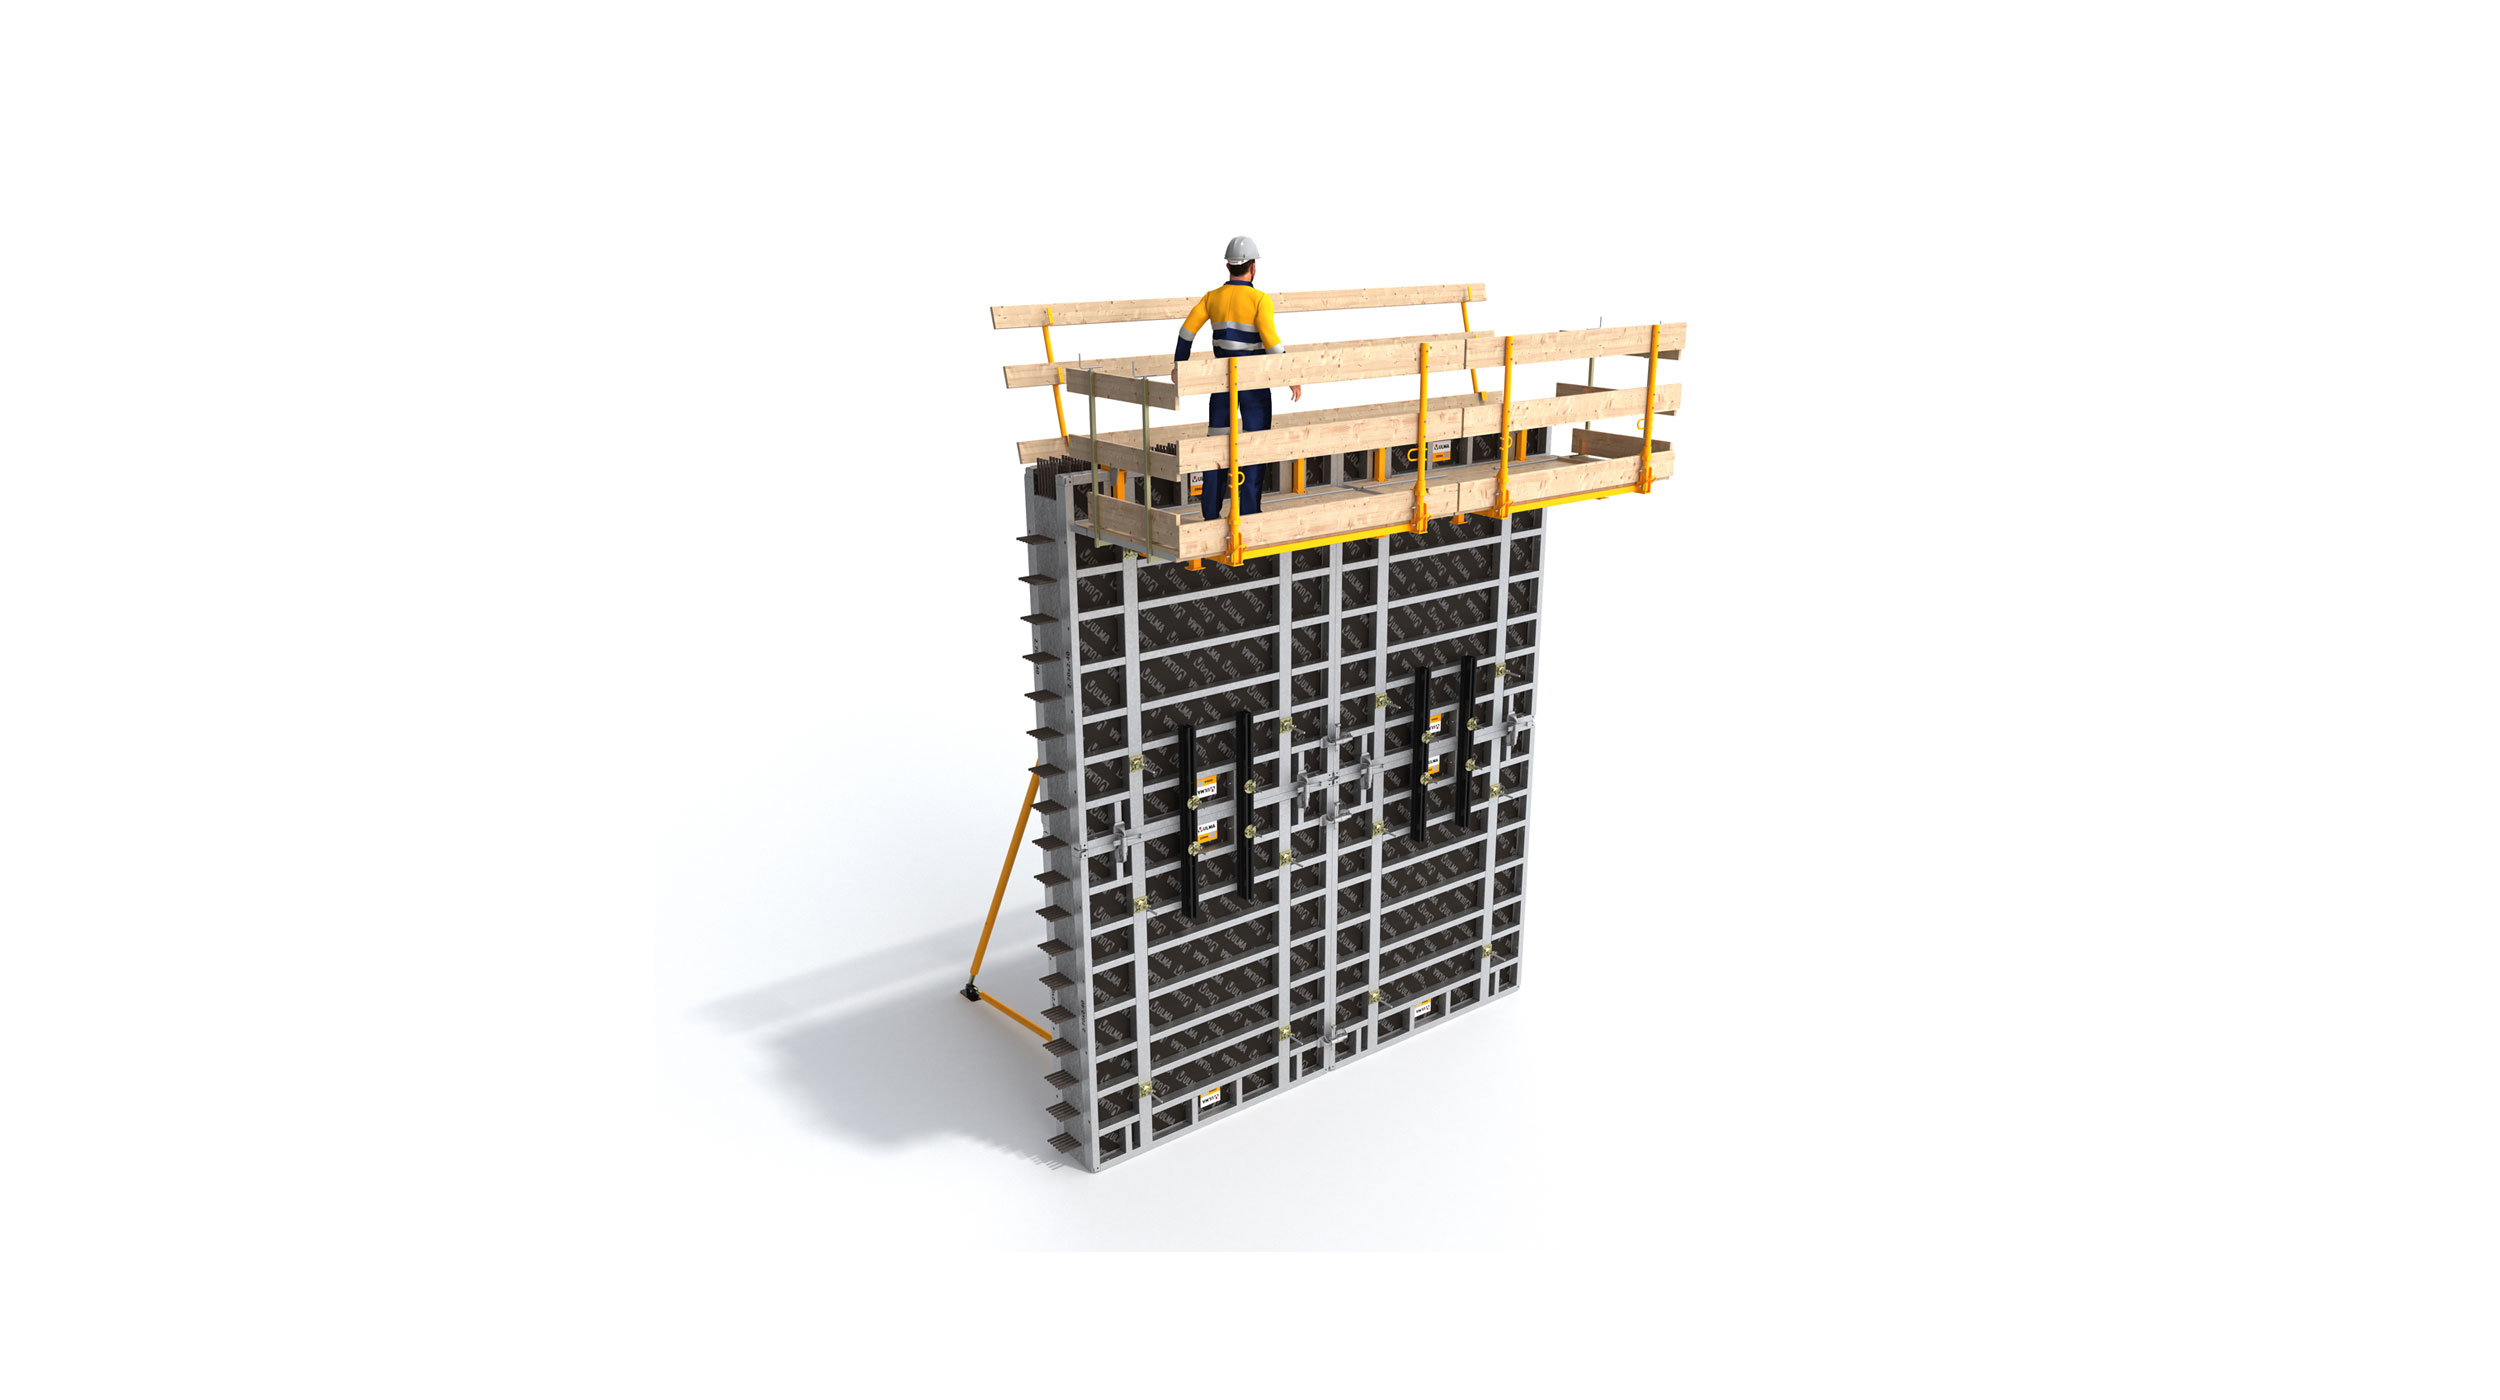 Optimized safety platform designed for wall concreting tasks. Easy attachment to formwork panels.